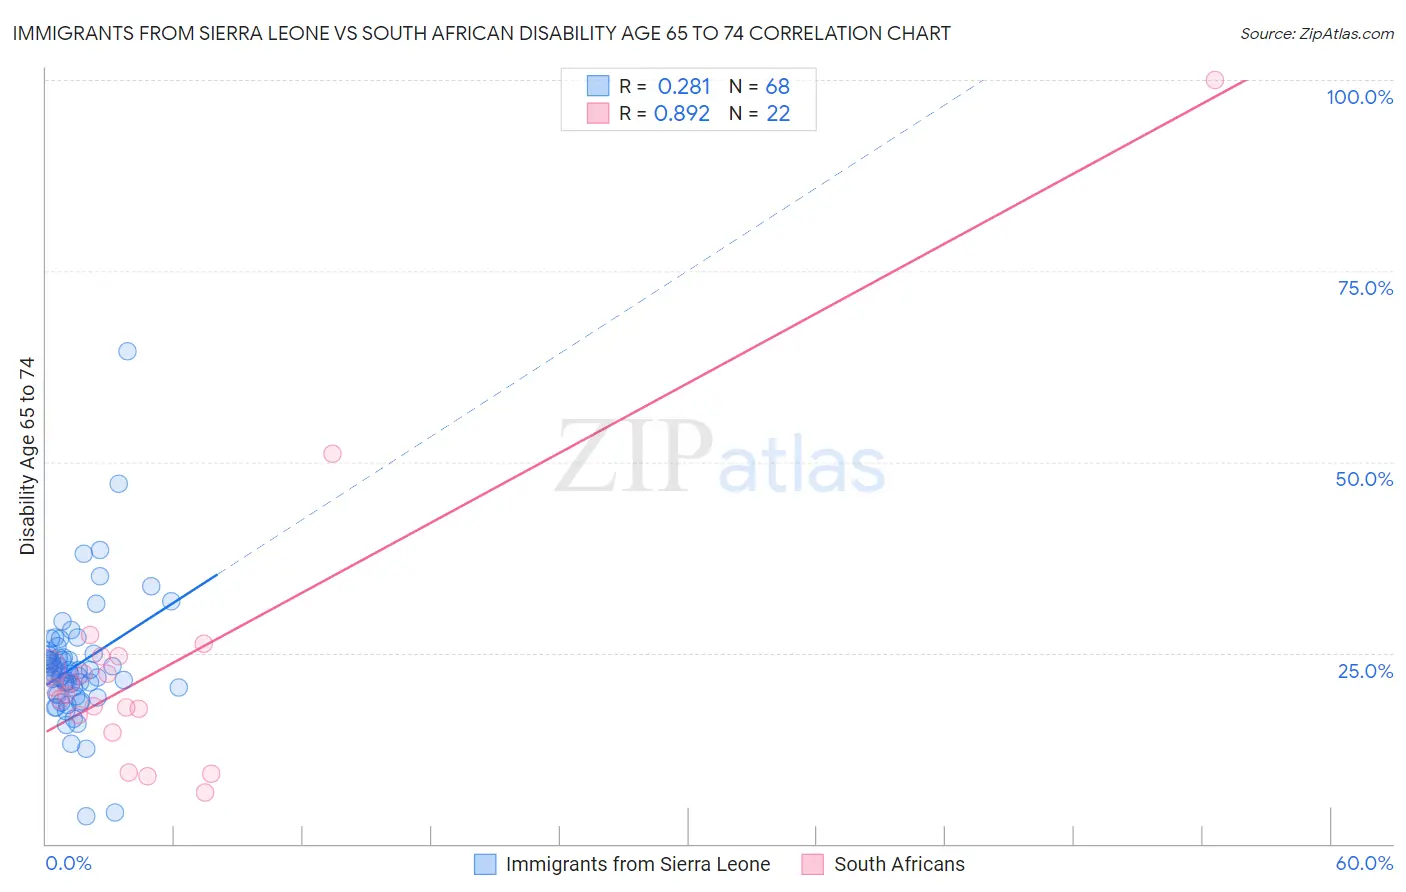 Immigrants from Sierra Leone vs South African Disability Age 65 to 74